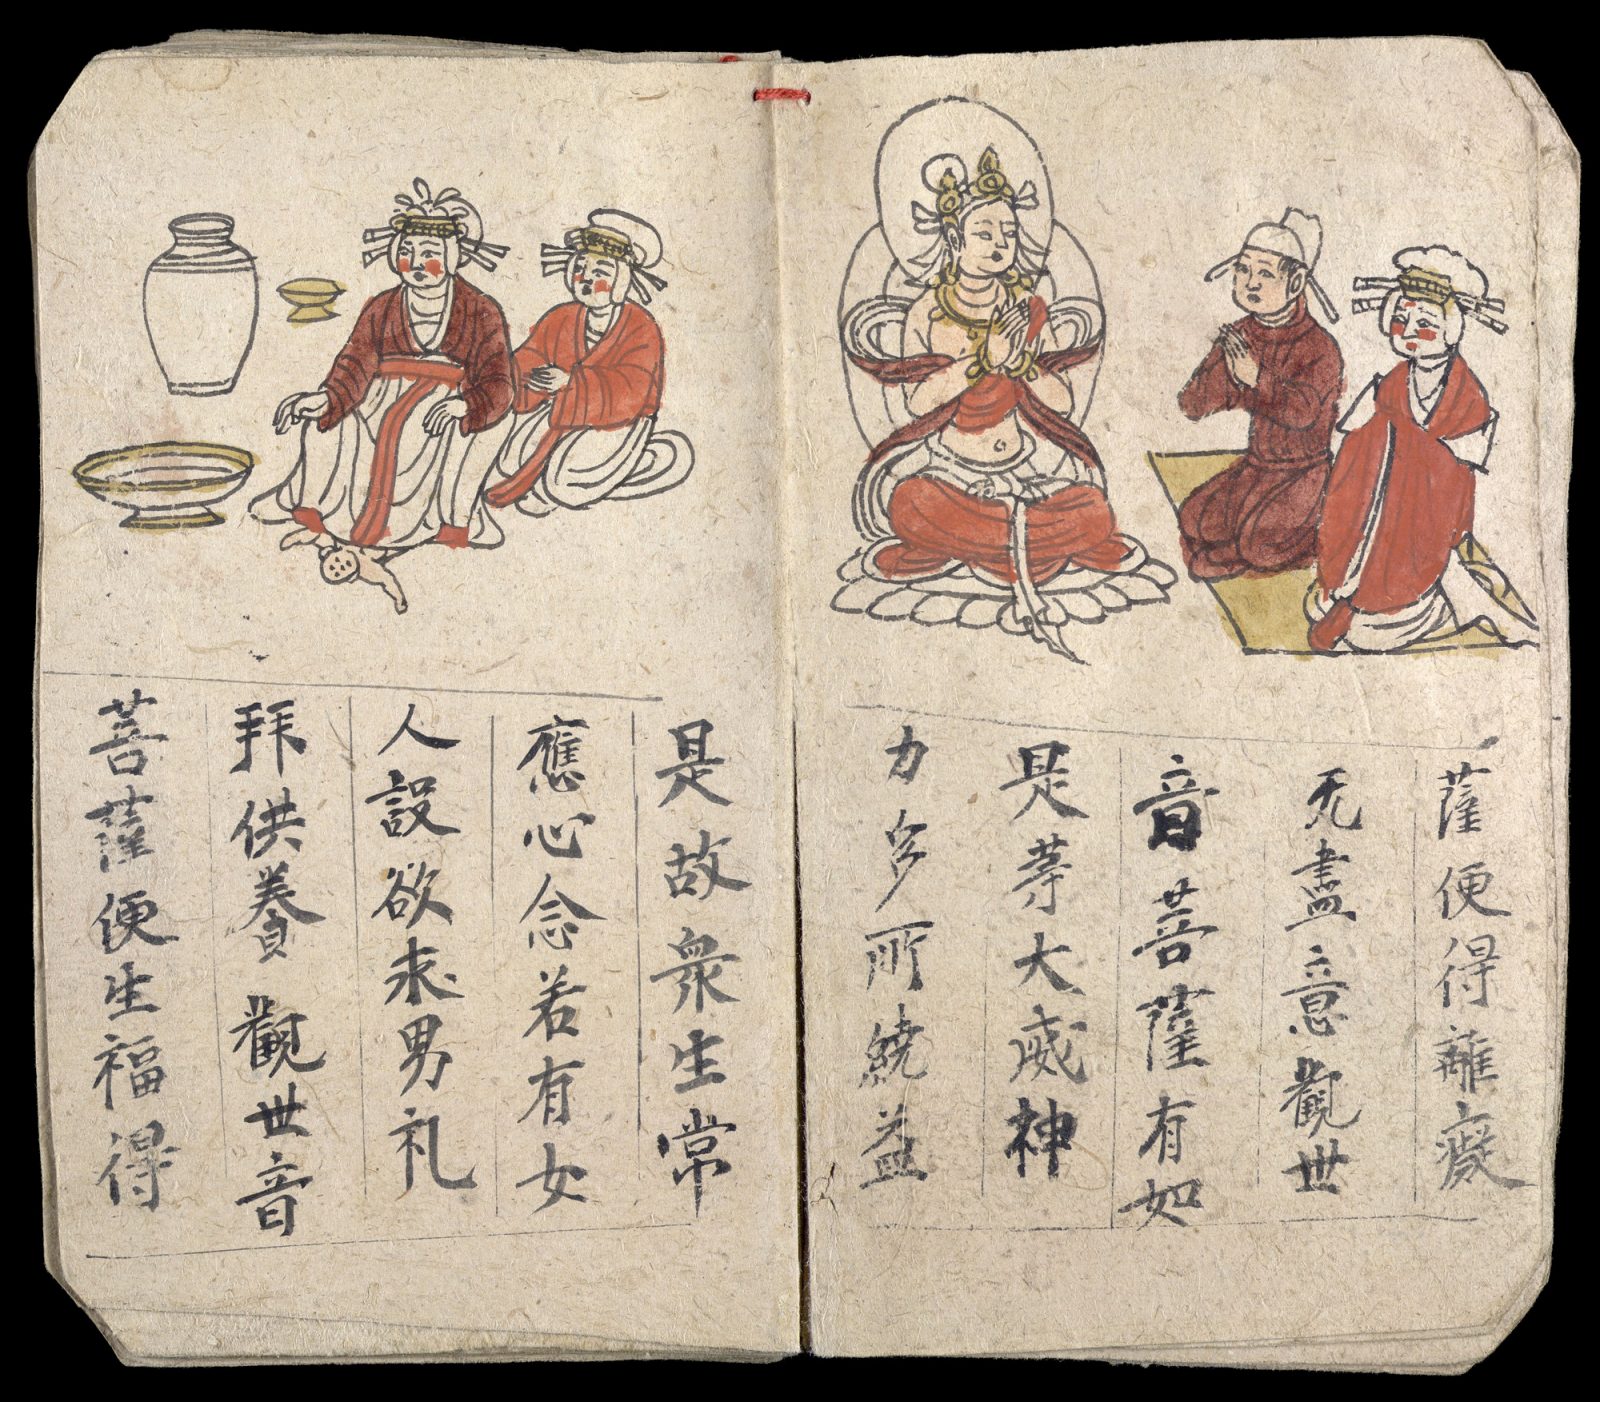 Miniature painting of Guanyin (Bodhisattva Avalokitesvara) on a leaf from a Bodhi tree in a book containing the Heart Sutra and the Lotus Sutra. China, 19th century. Courtesy British Library Board